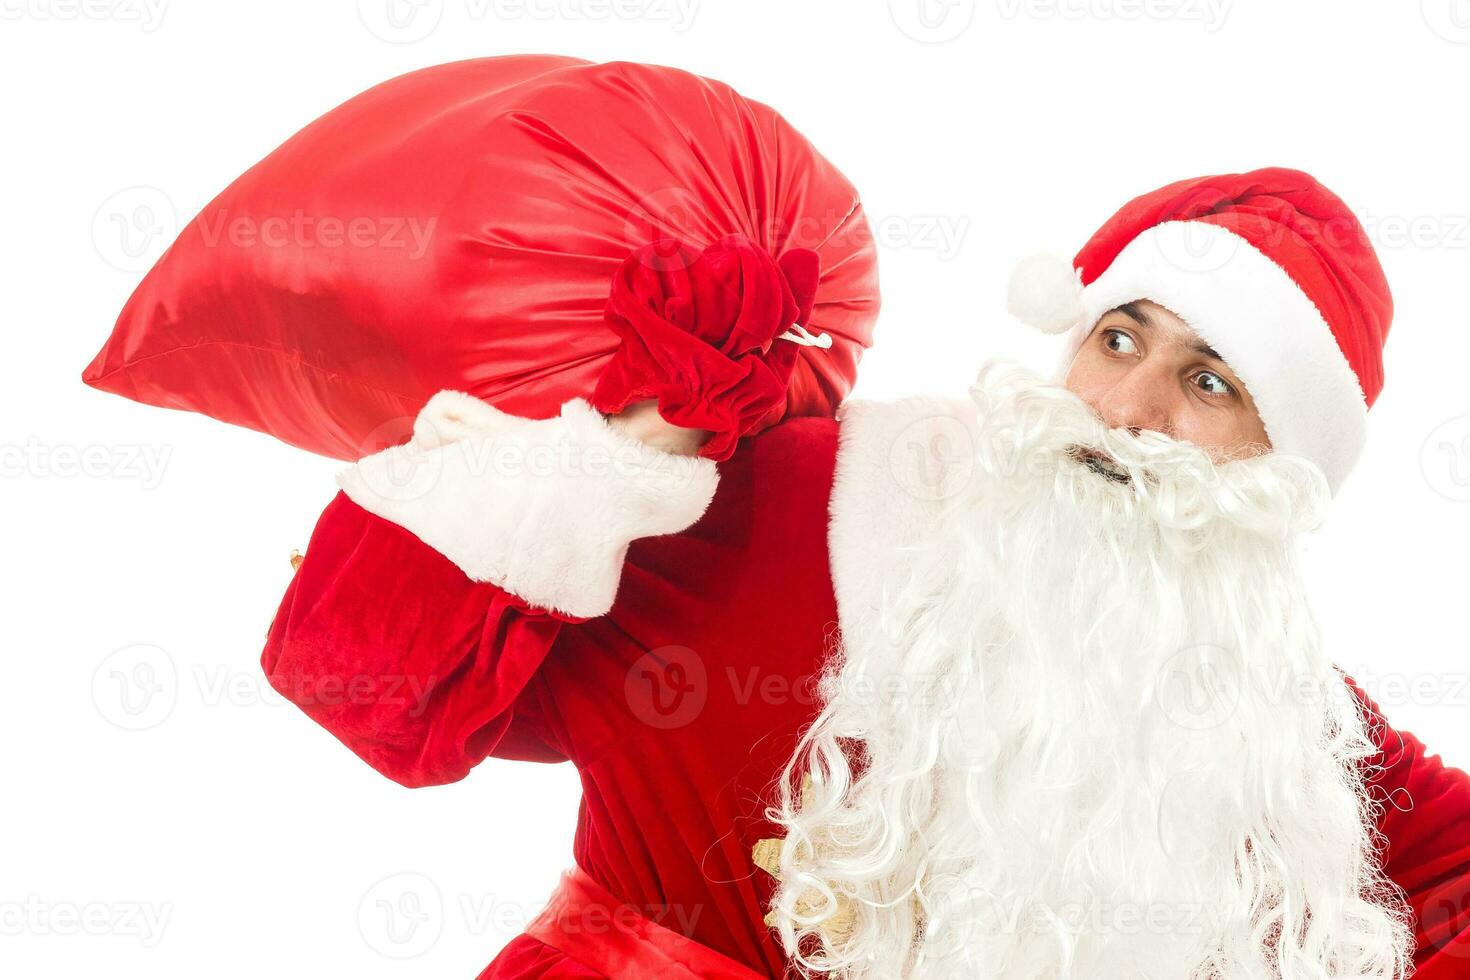 Santa claus holding a gifts against white background photo